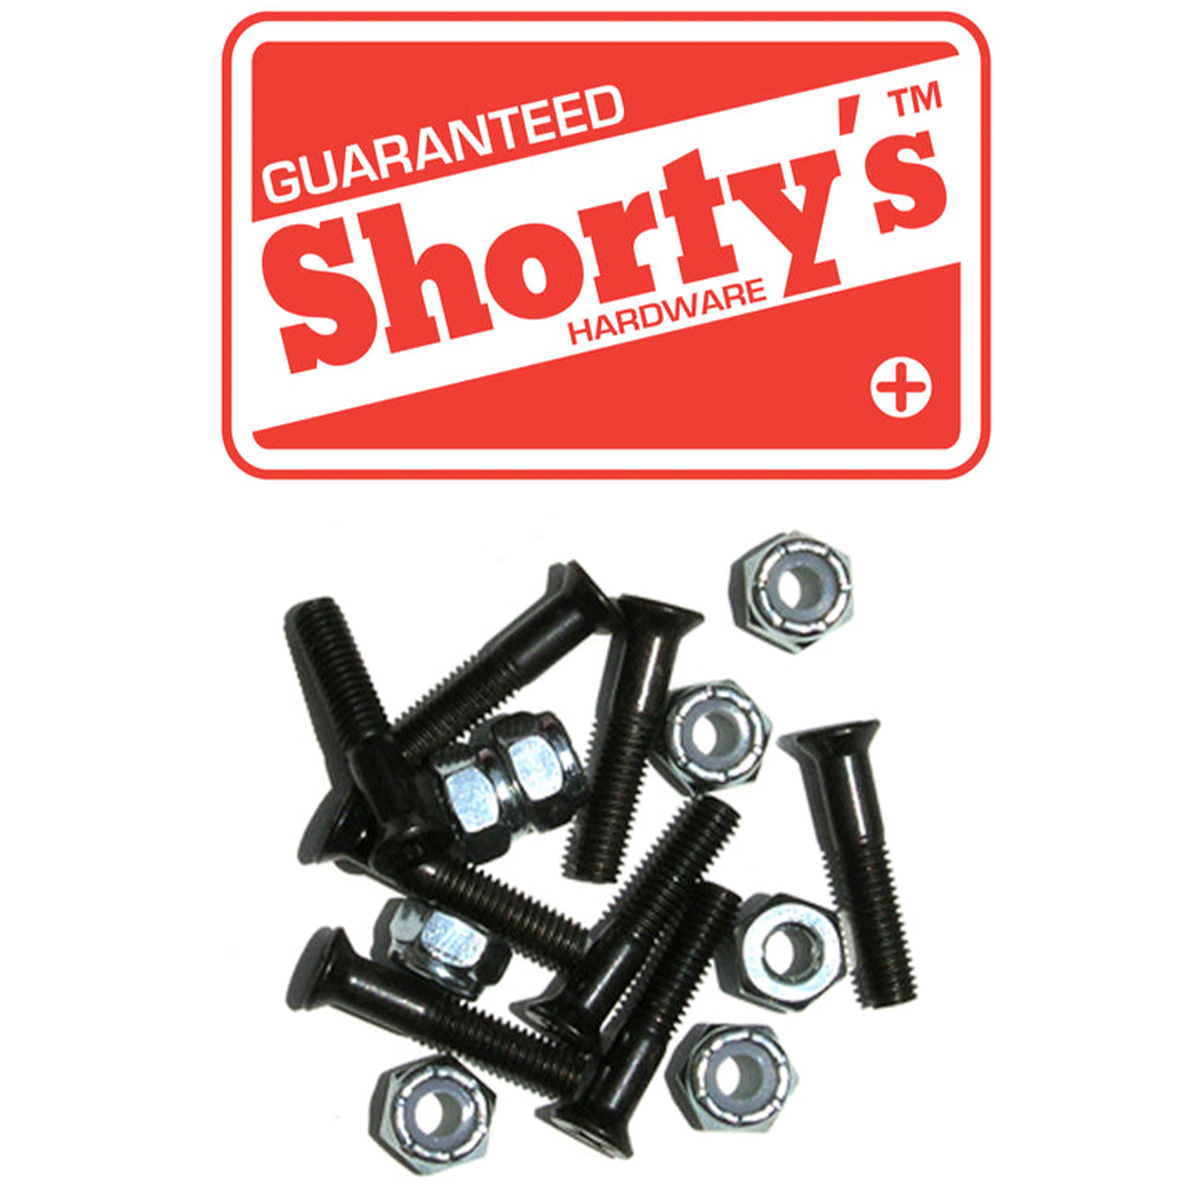 Shorty's Phillips Hardware 1 1/8 Inch 